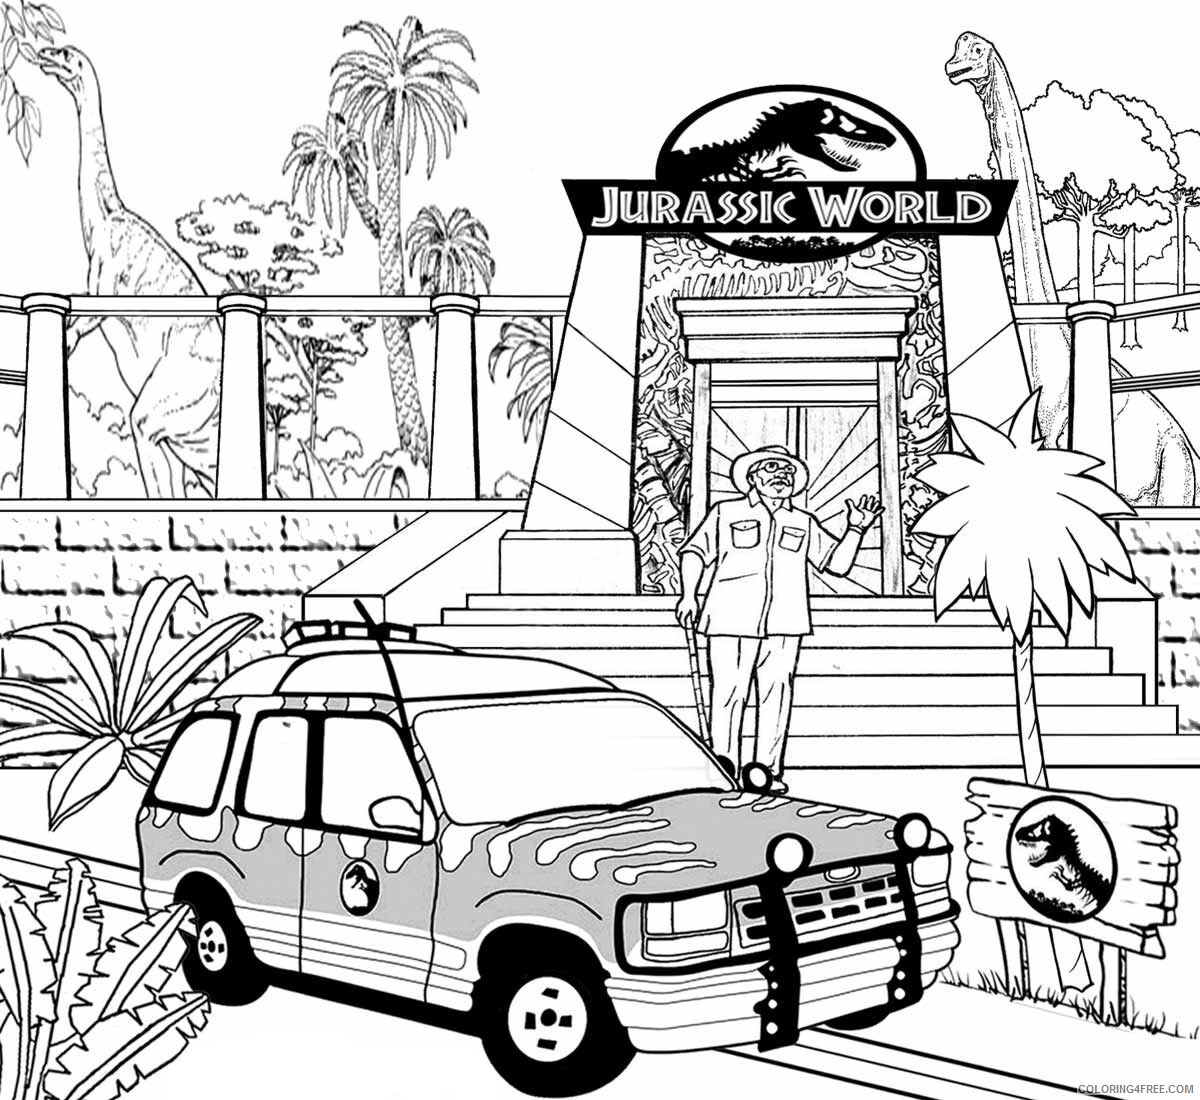 Jurassic World Coloring Pages for boys Printable 2020 0529 Coloring4free